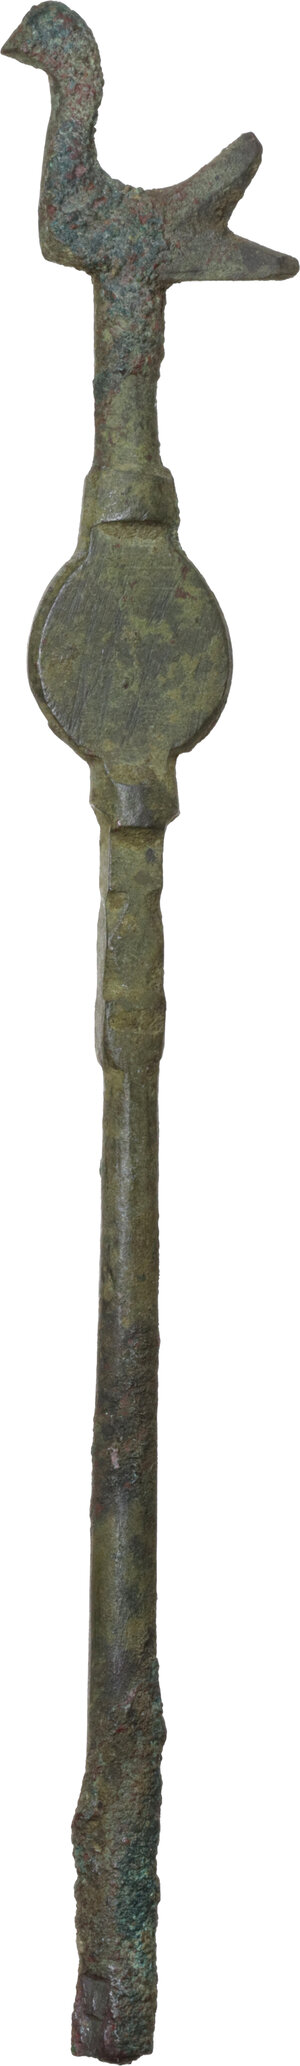 obverse: SMALL BRONZE ROD Roman period, c. 1st - 4th century AD. (?) Bronze rod with a round section stem, with a bird on the top (perhaps a dove) and a flat point towards the top, probably suitable for the handle of the instrument. Lenght: 112 mm